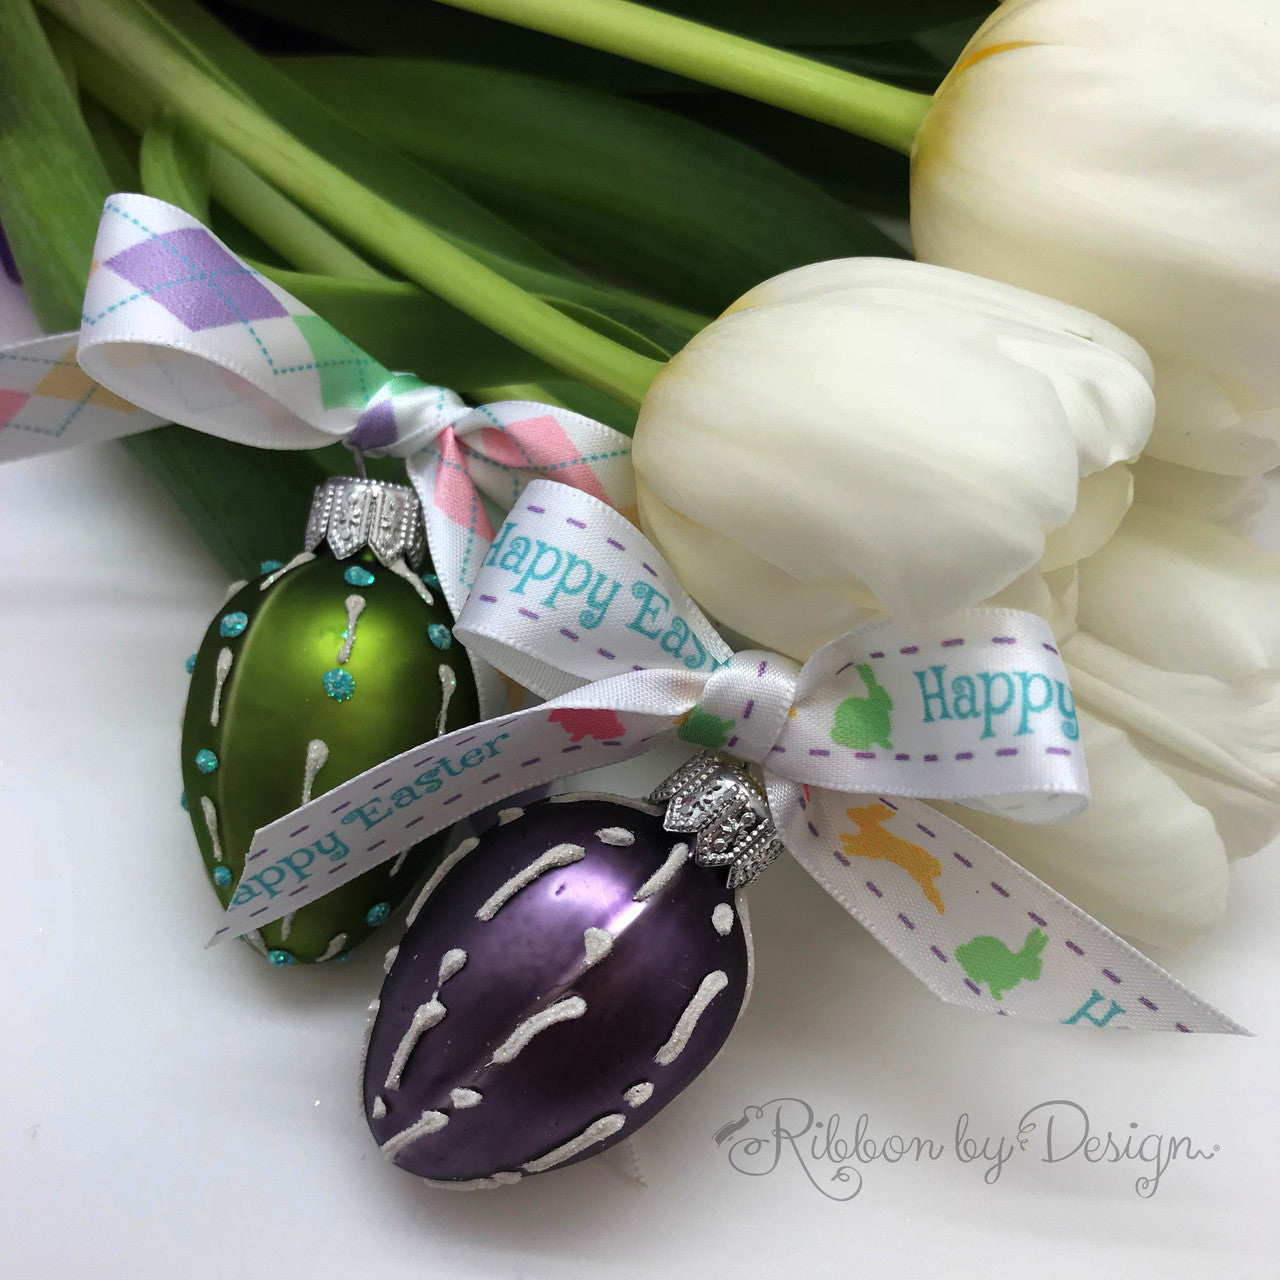 Our ribbons make the prettiest additions to any Easter decor!